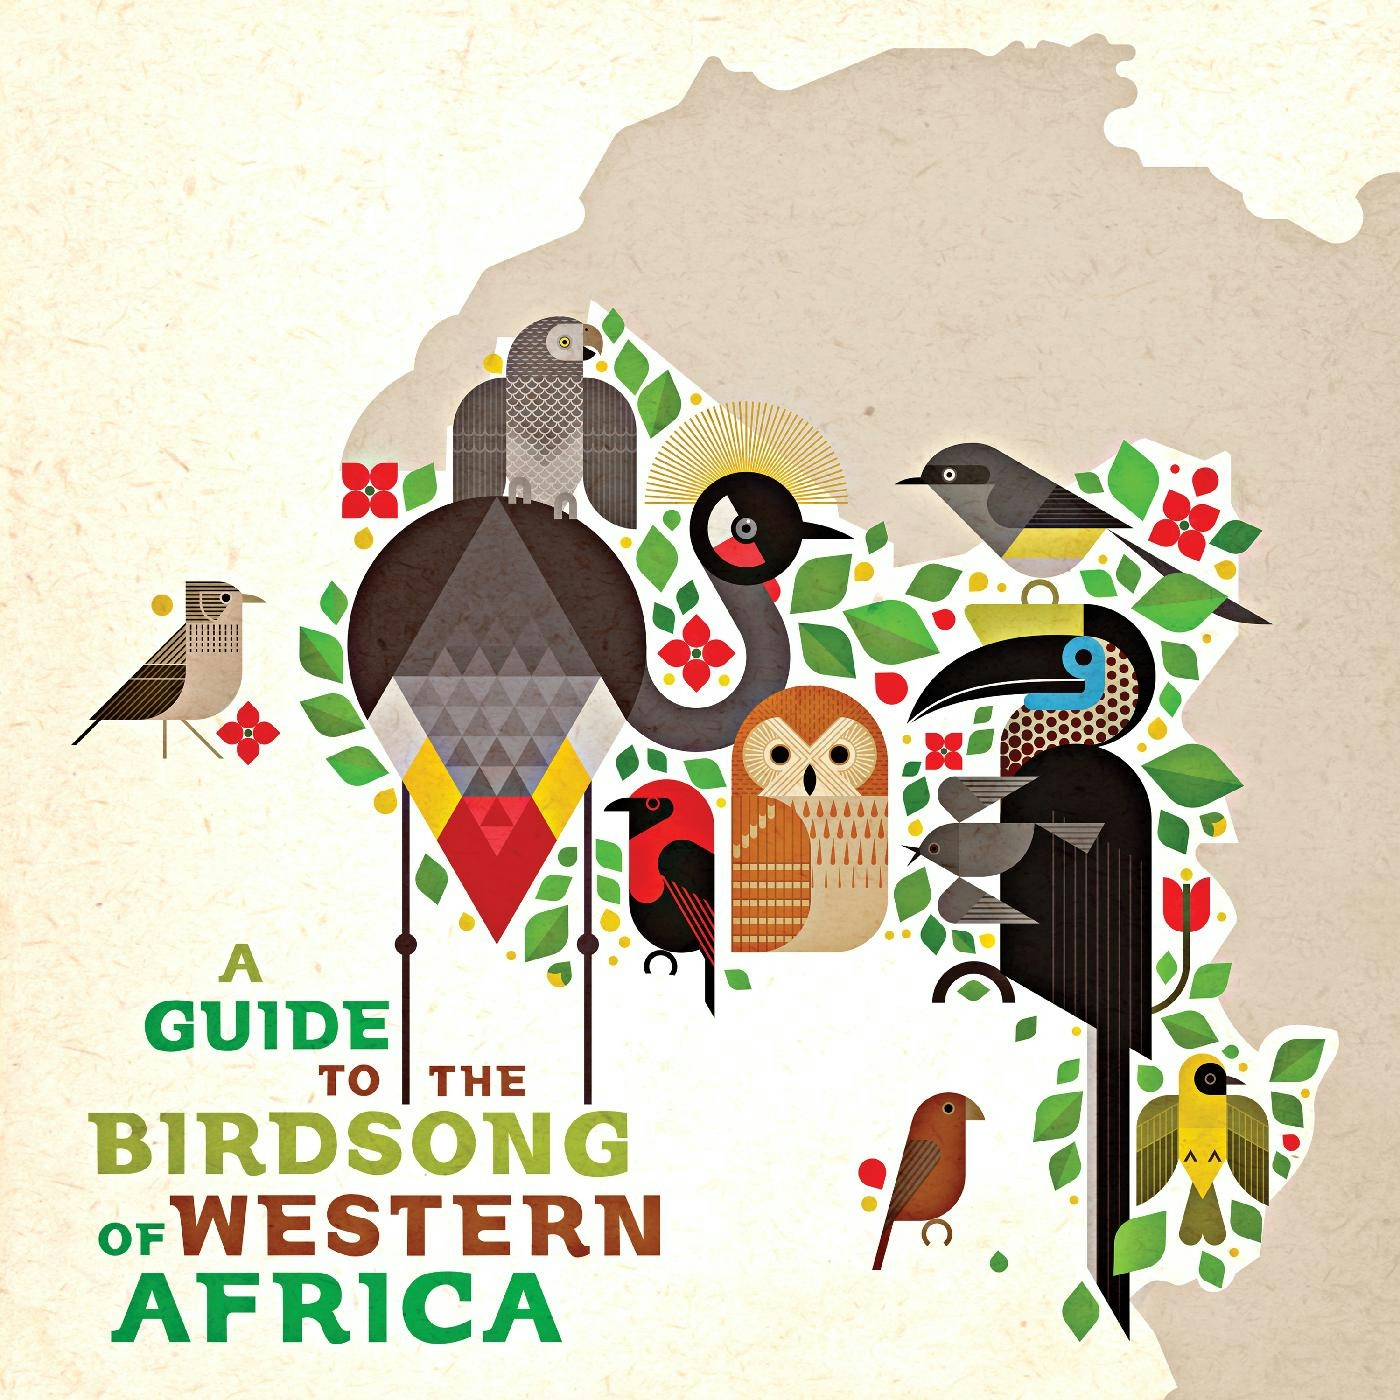 Album artwork for Album artwork for A Guide to the Birdsong of Western Africa by Various Artists by A Guide to the Birdsong of Western Africa - Various Artists